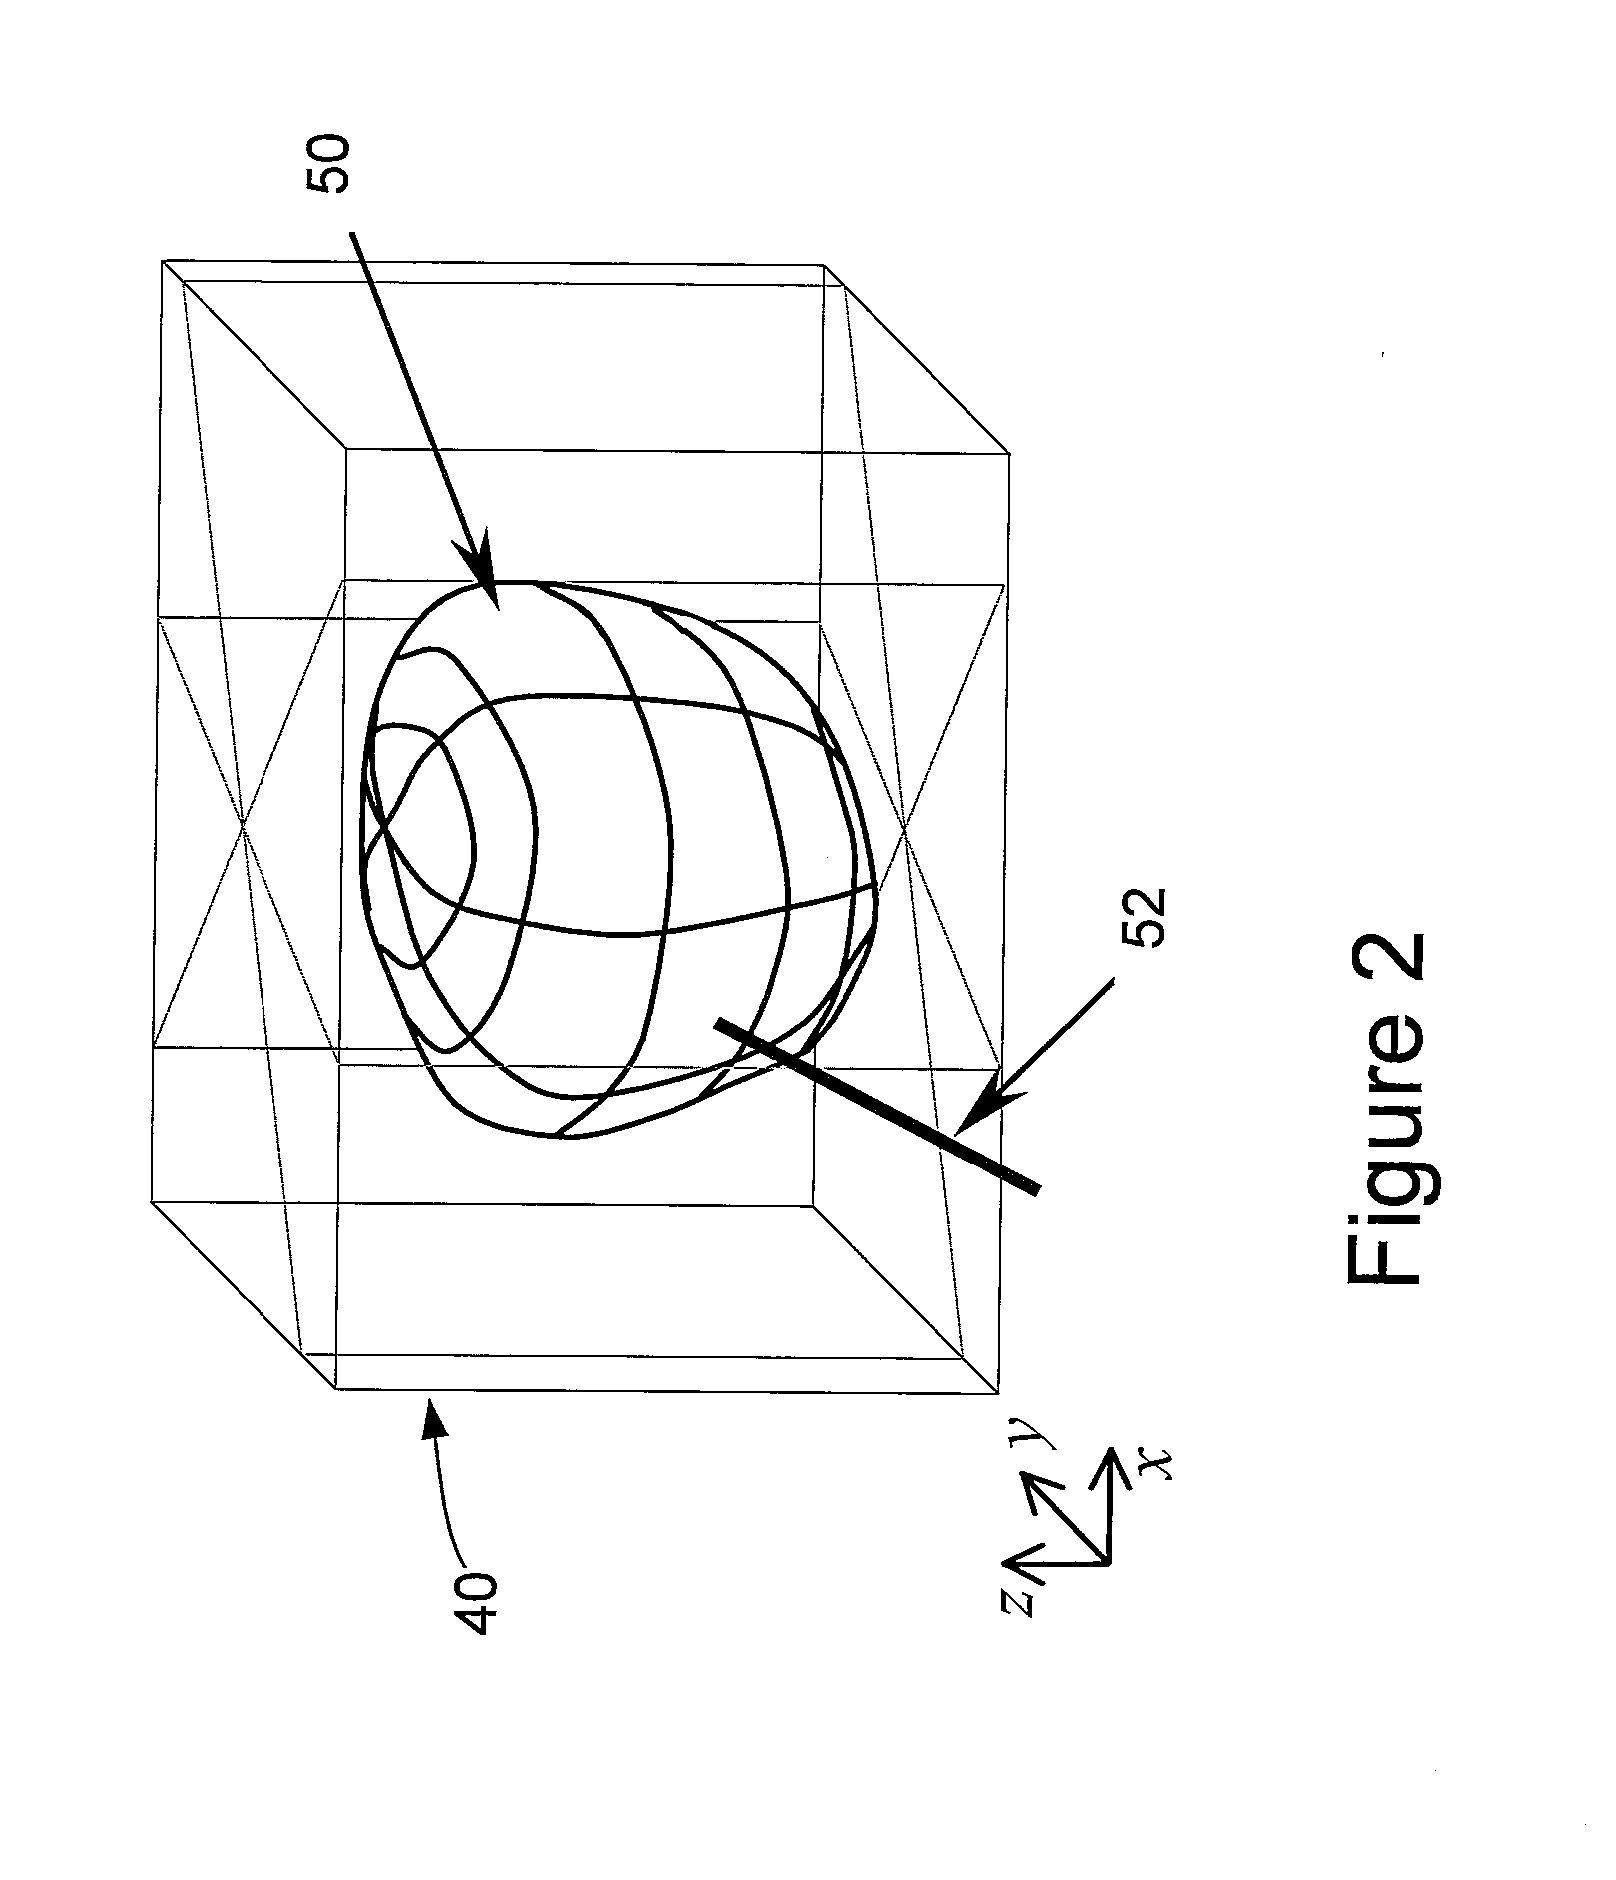 System and method for prostate biopsy